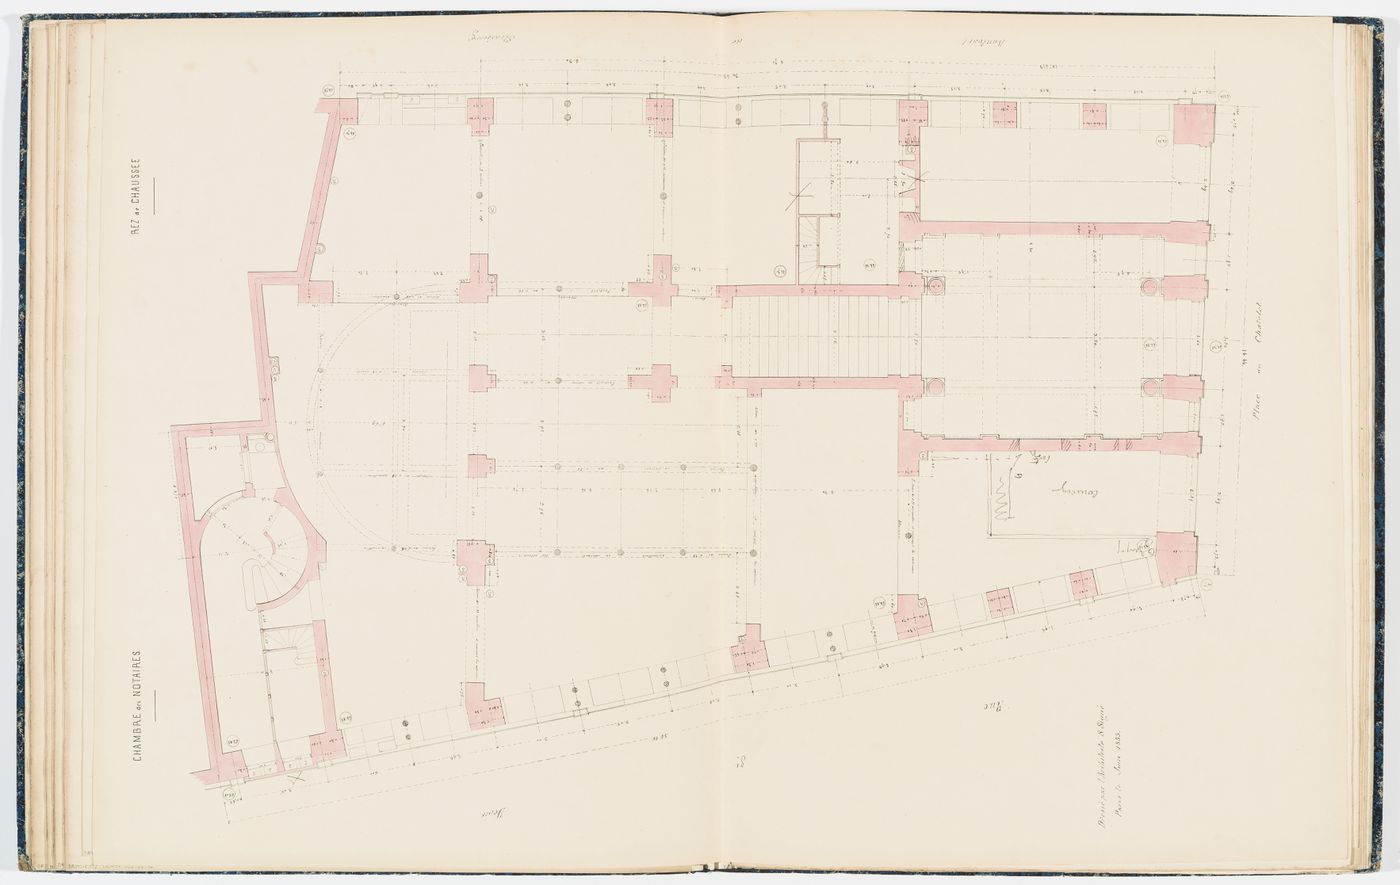 Working drawing for the Chambre des Notaires: Plan for the "rez-de-chausée"